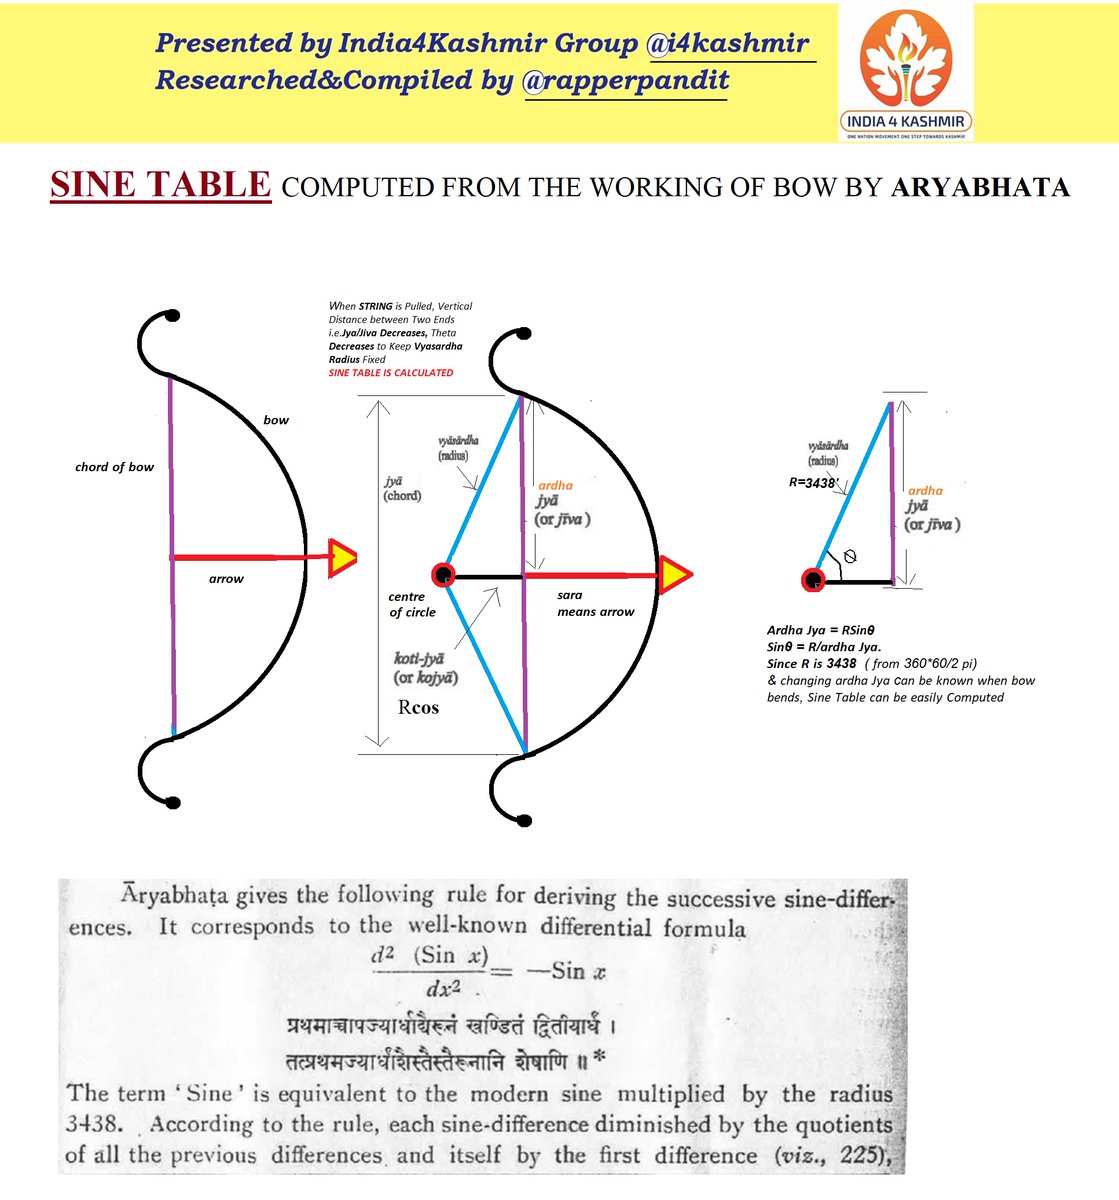 3/n We all have seen the Use of Bow/Arrow to fight. But the Brilliant ऋषि-आर्यभट used it for maths. The basis of Trignometry. Sin & Cosine Tables. (Remember School Days). A Shloka represents modern day Differential EquationSee the Illustration below. See the Brilliance !!